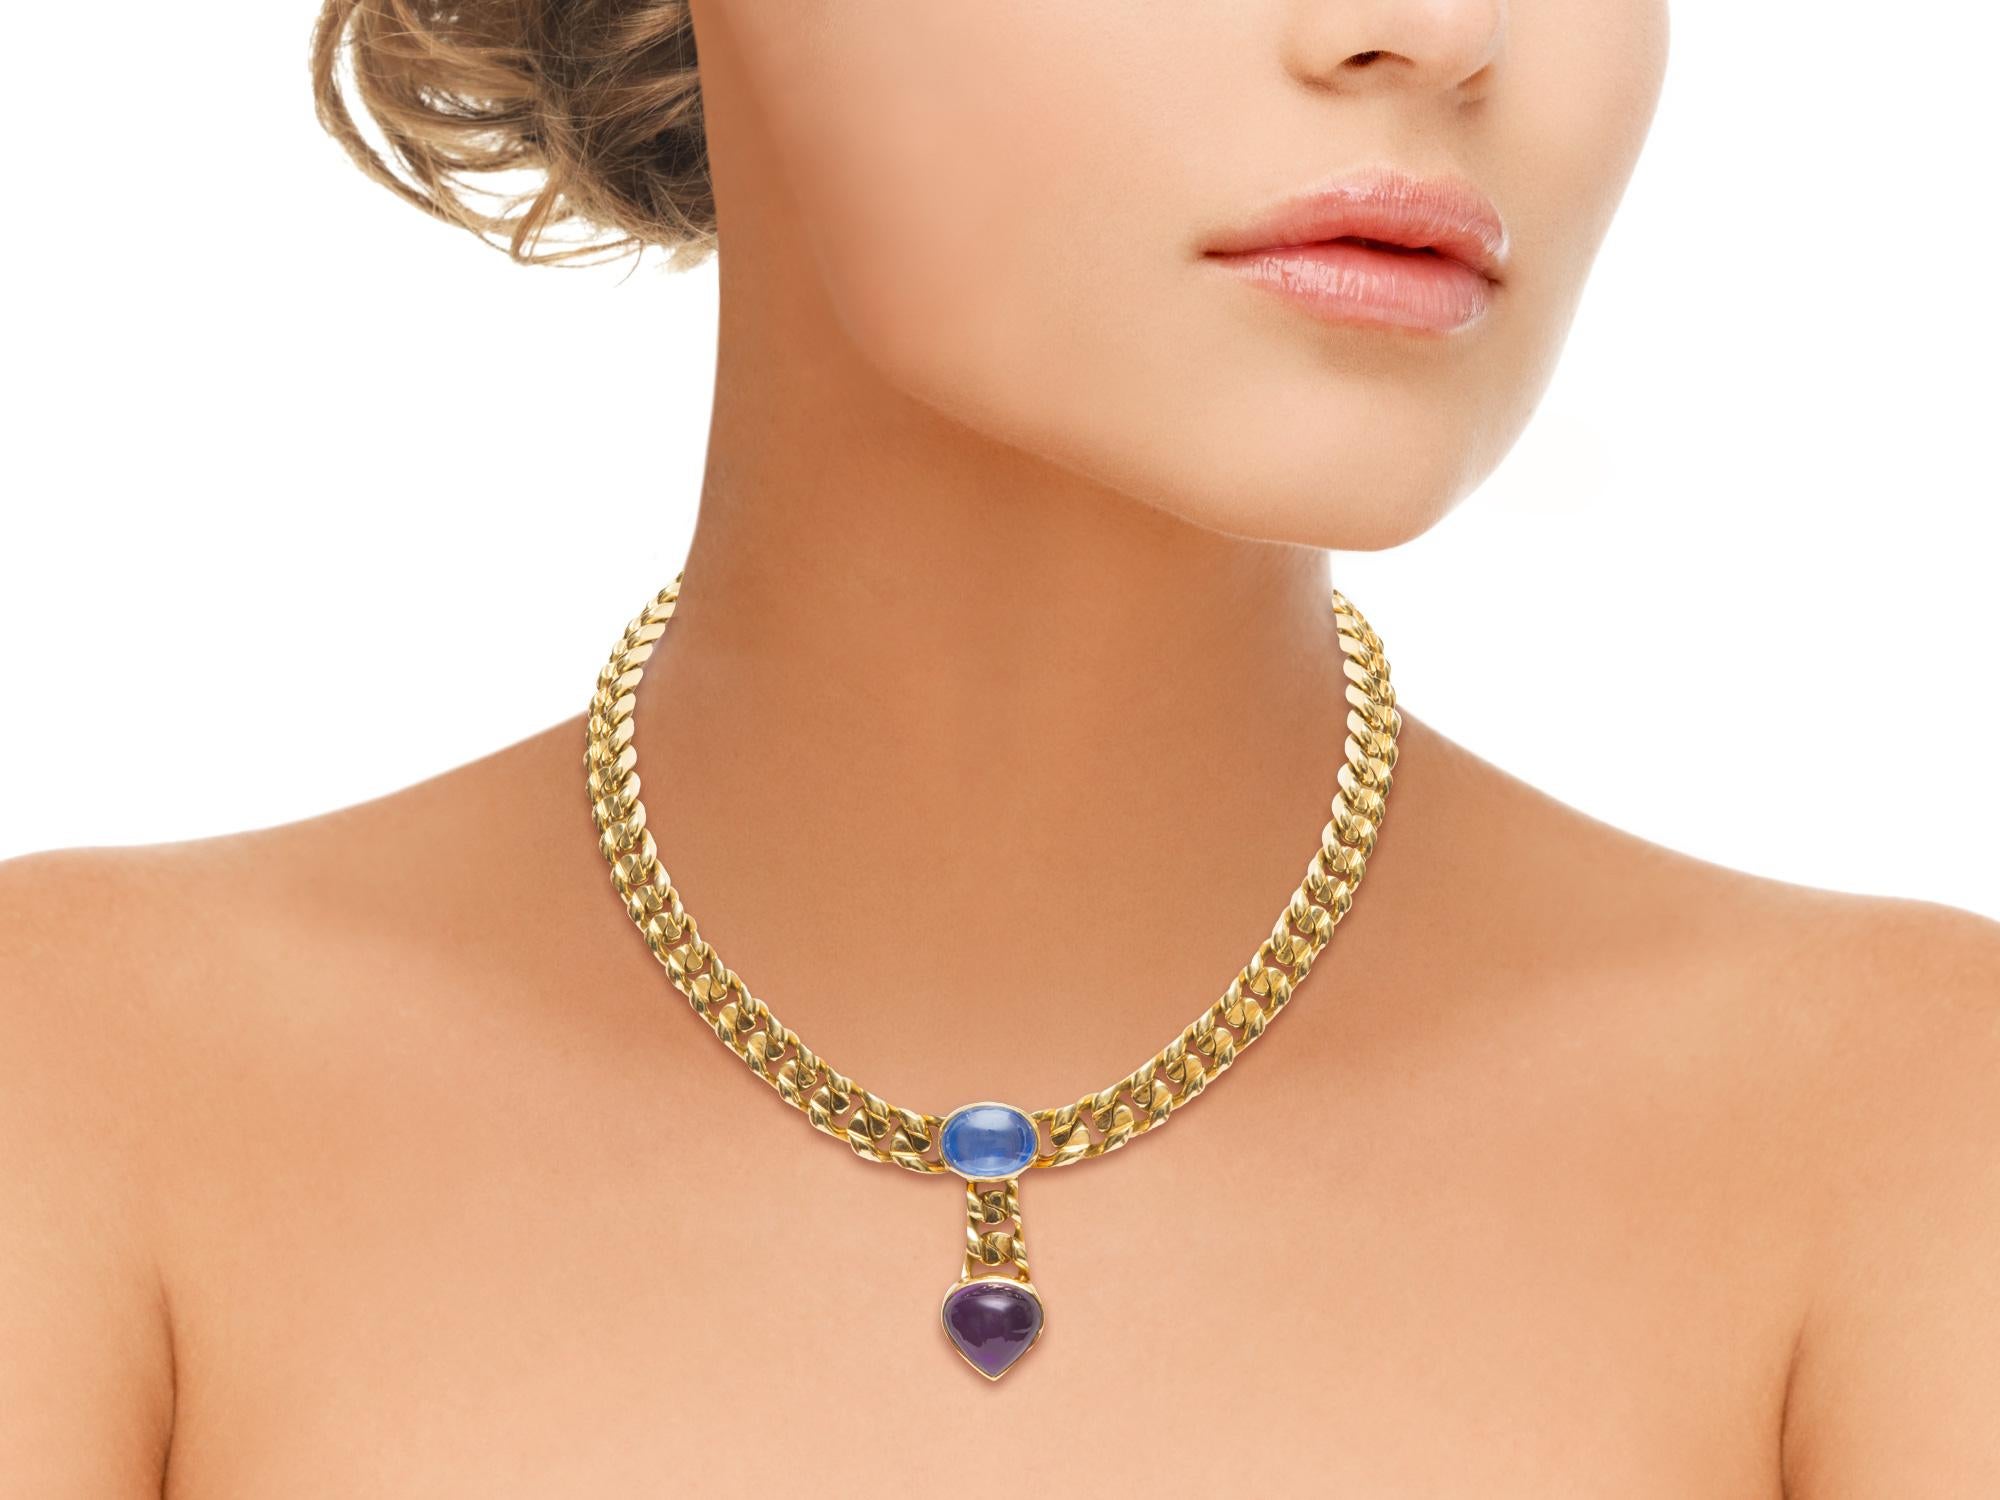 Bvgari 18k yellow gold necklace with a cabochon amethyst and blue tourmaline set in a curb link chain. 